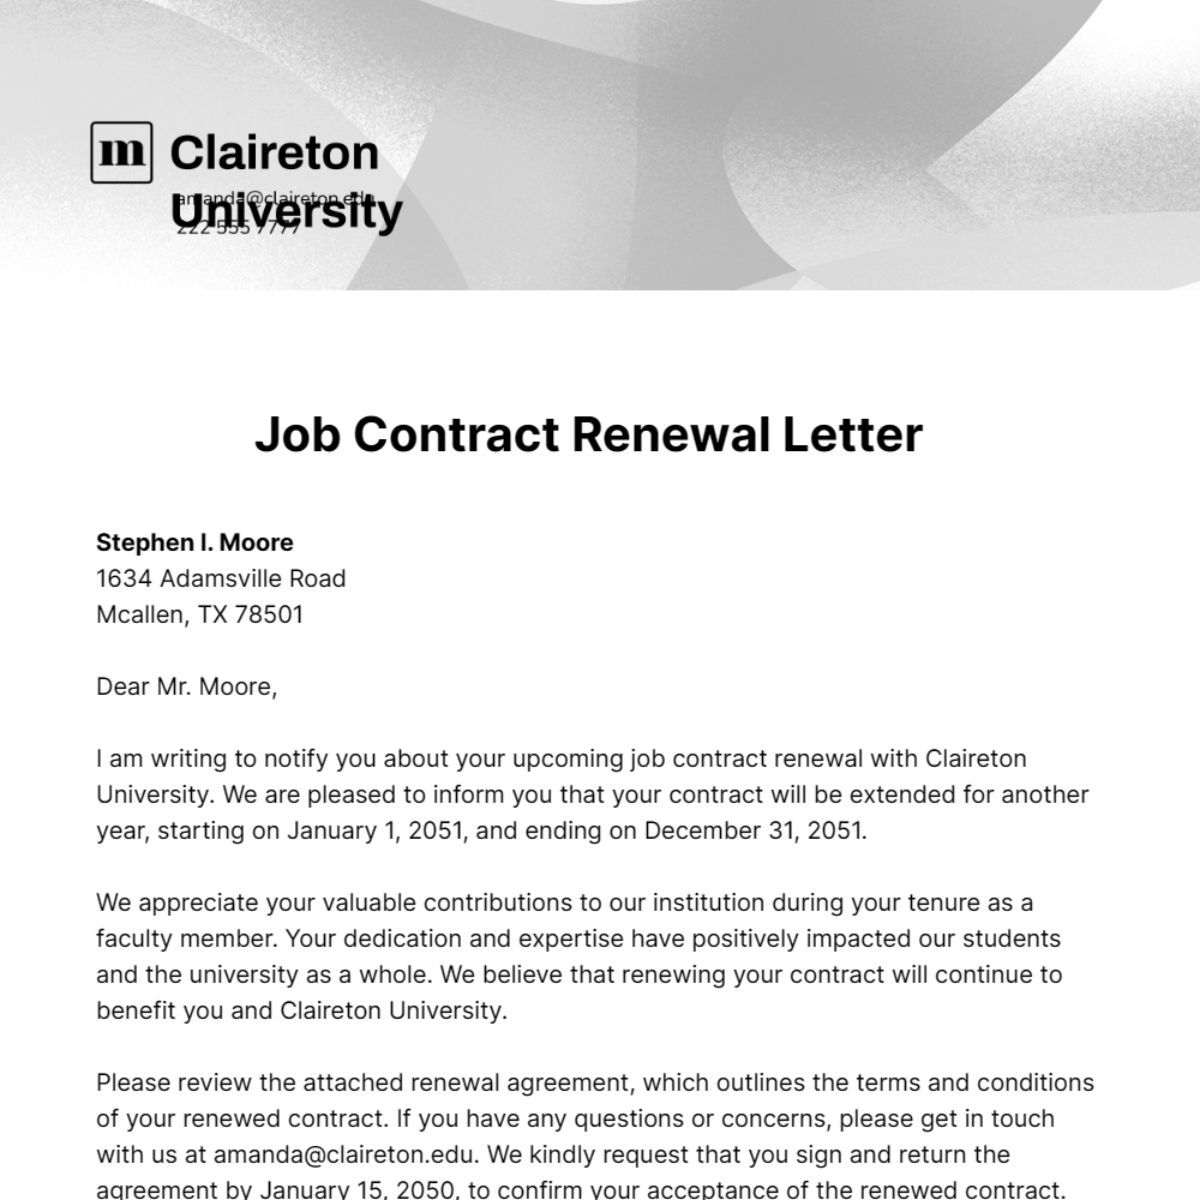 Job Contract Renewal Letter   Template